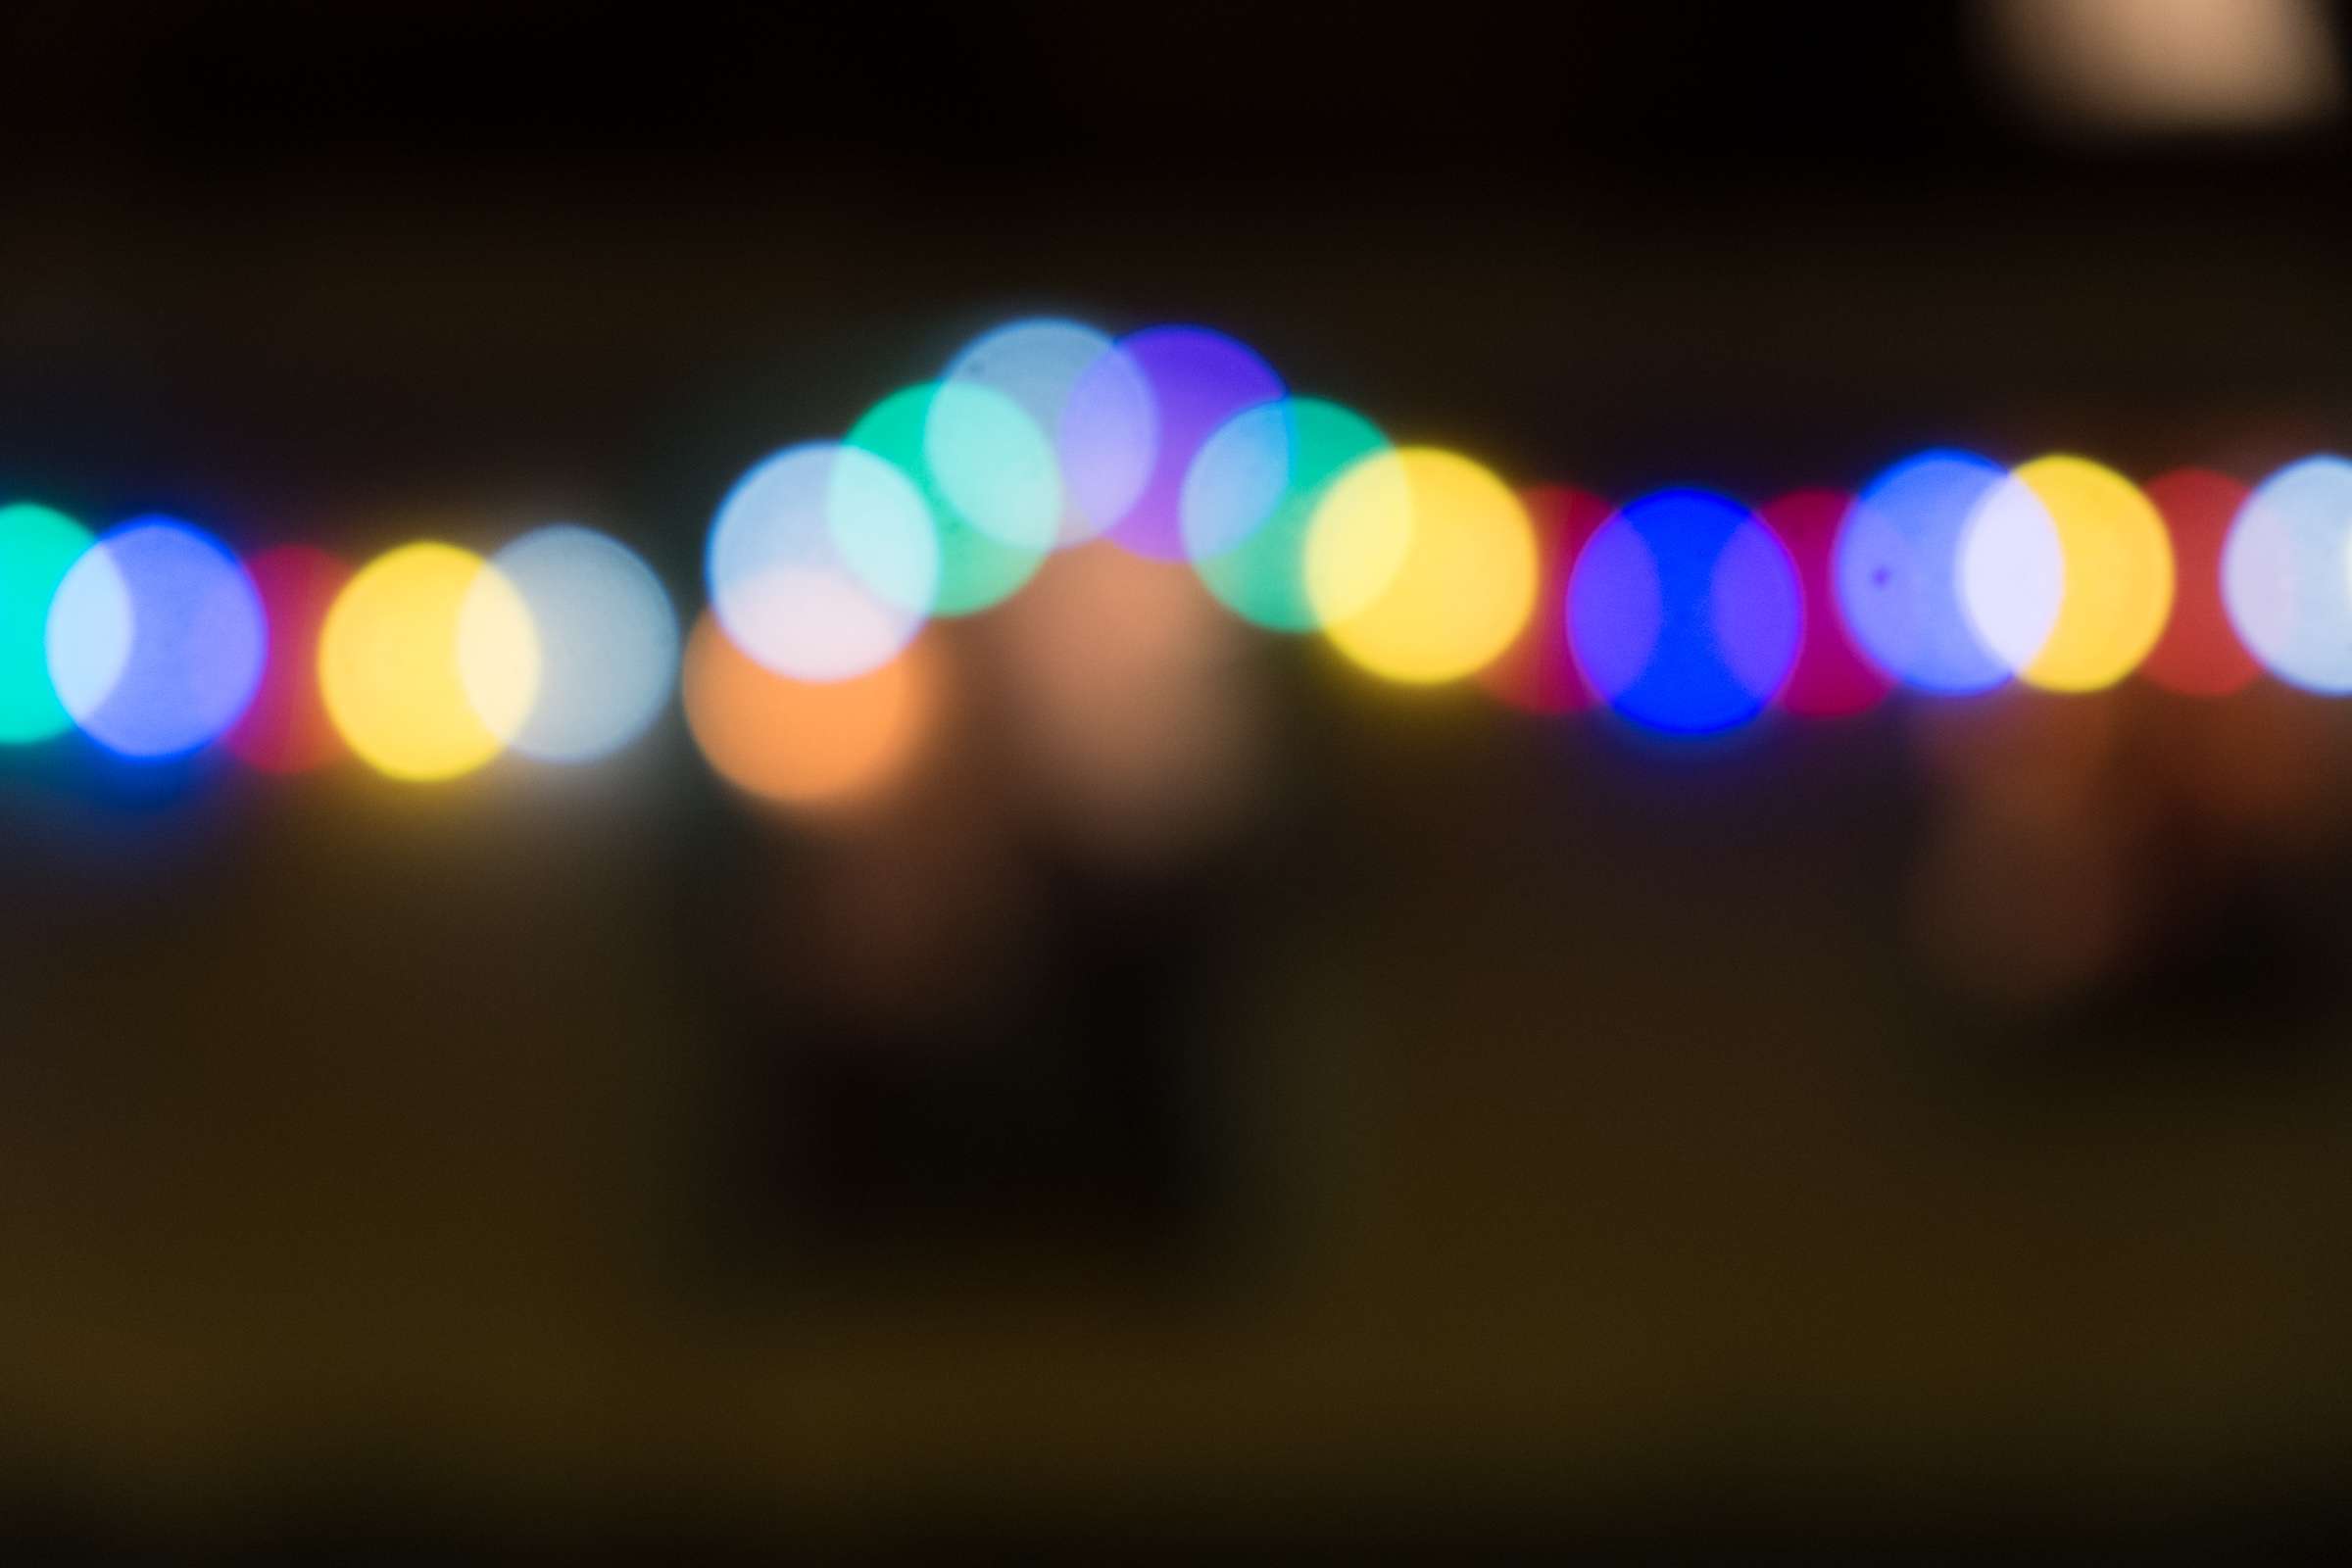 Out of focus lights from a restaurant